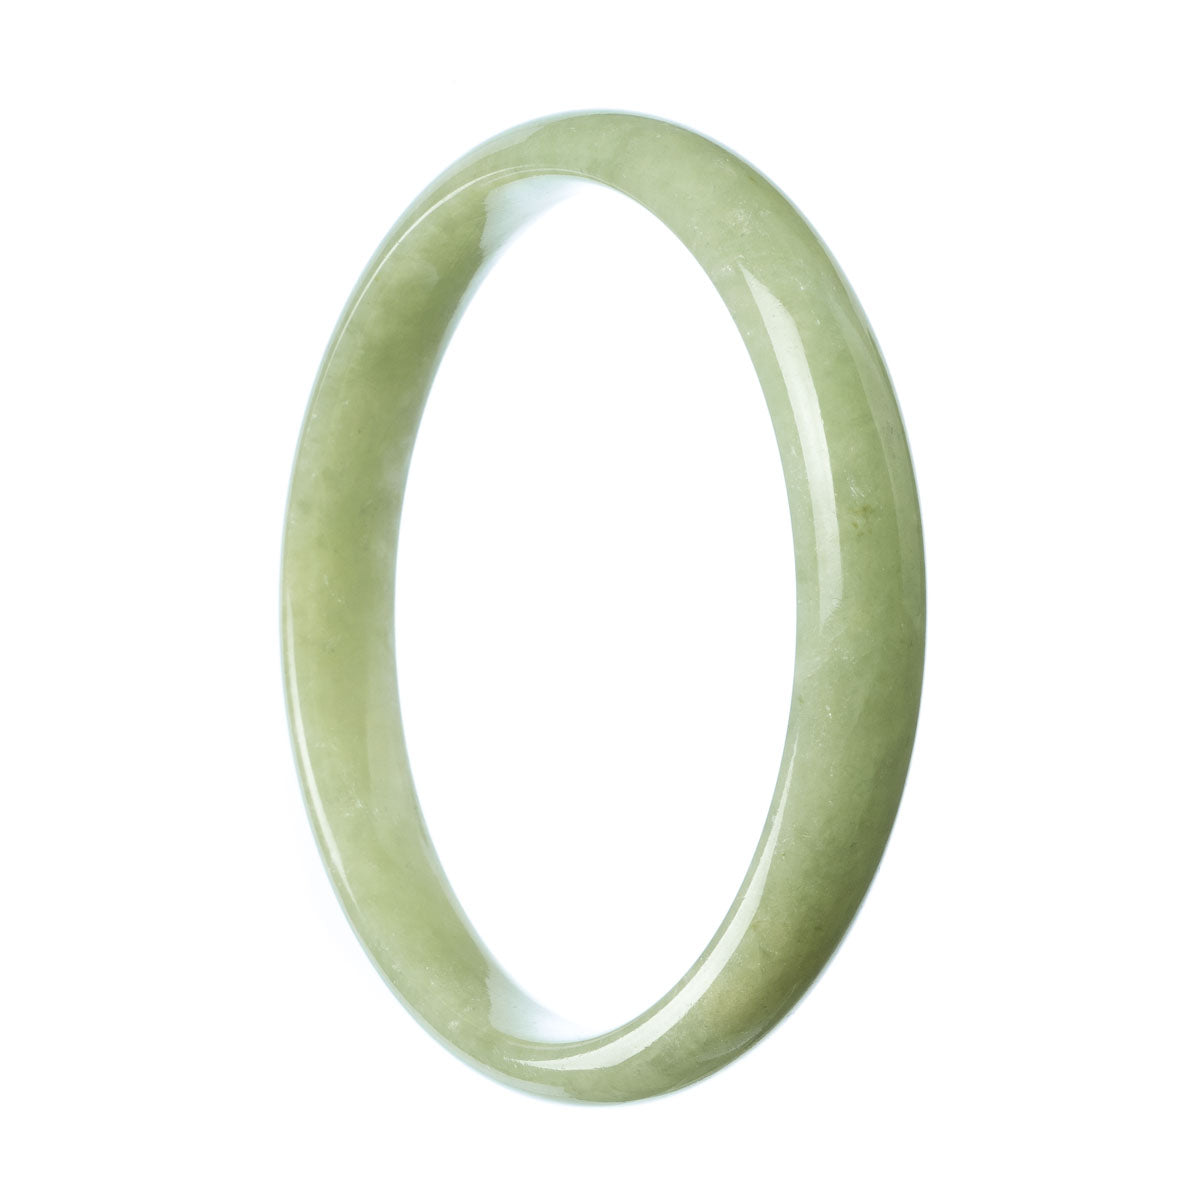 A half moon-shaped green jadeite bracelet with an authentic and natural appeal.